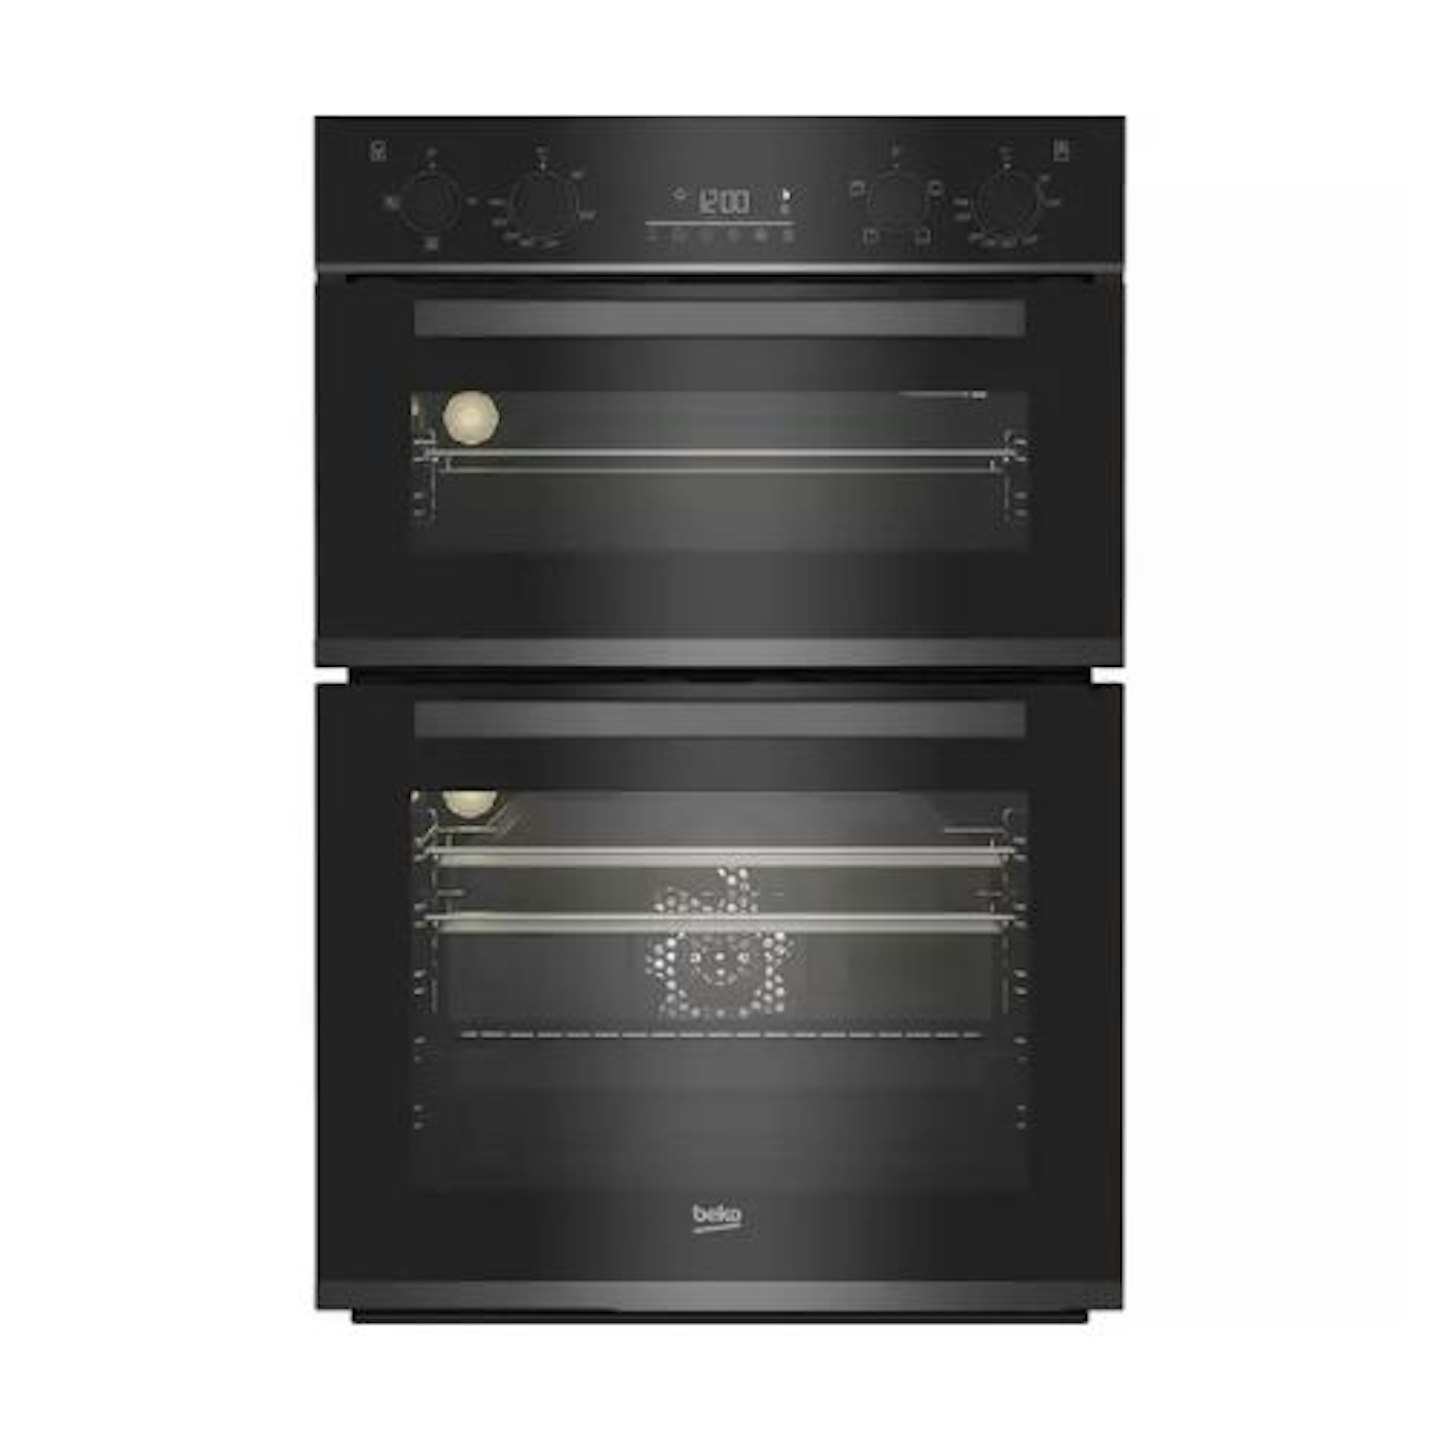 10 Double Oven Pros and Cons